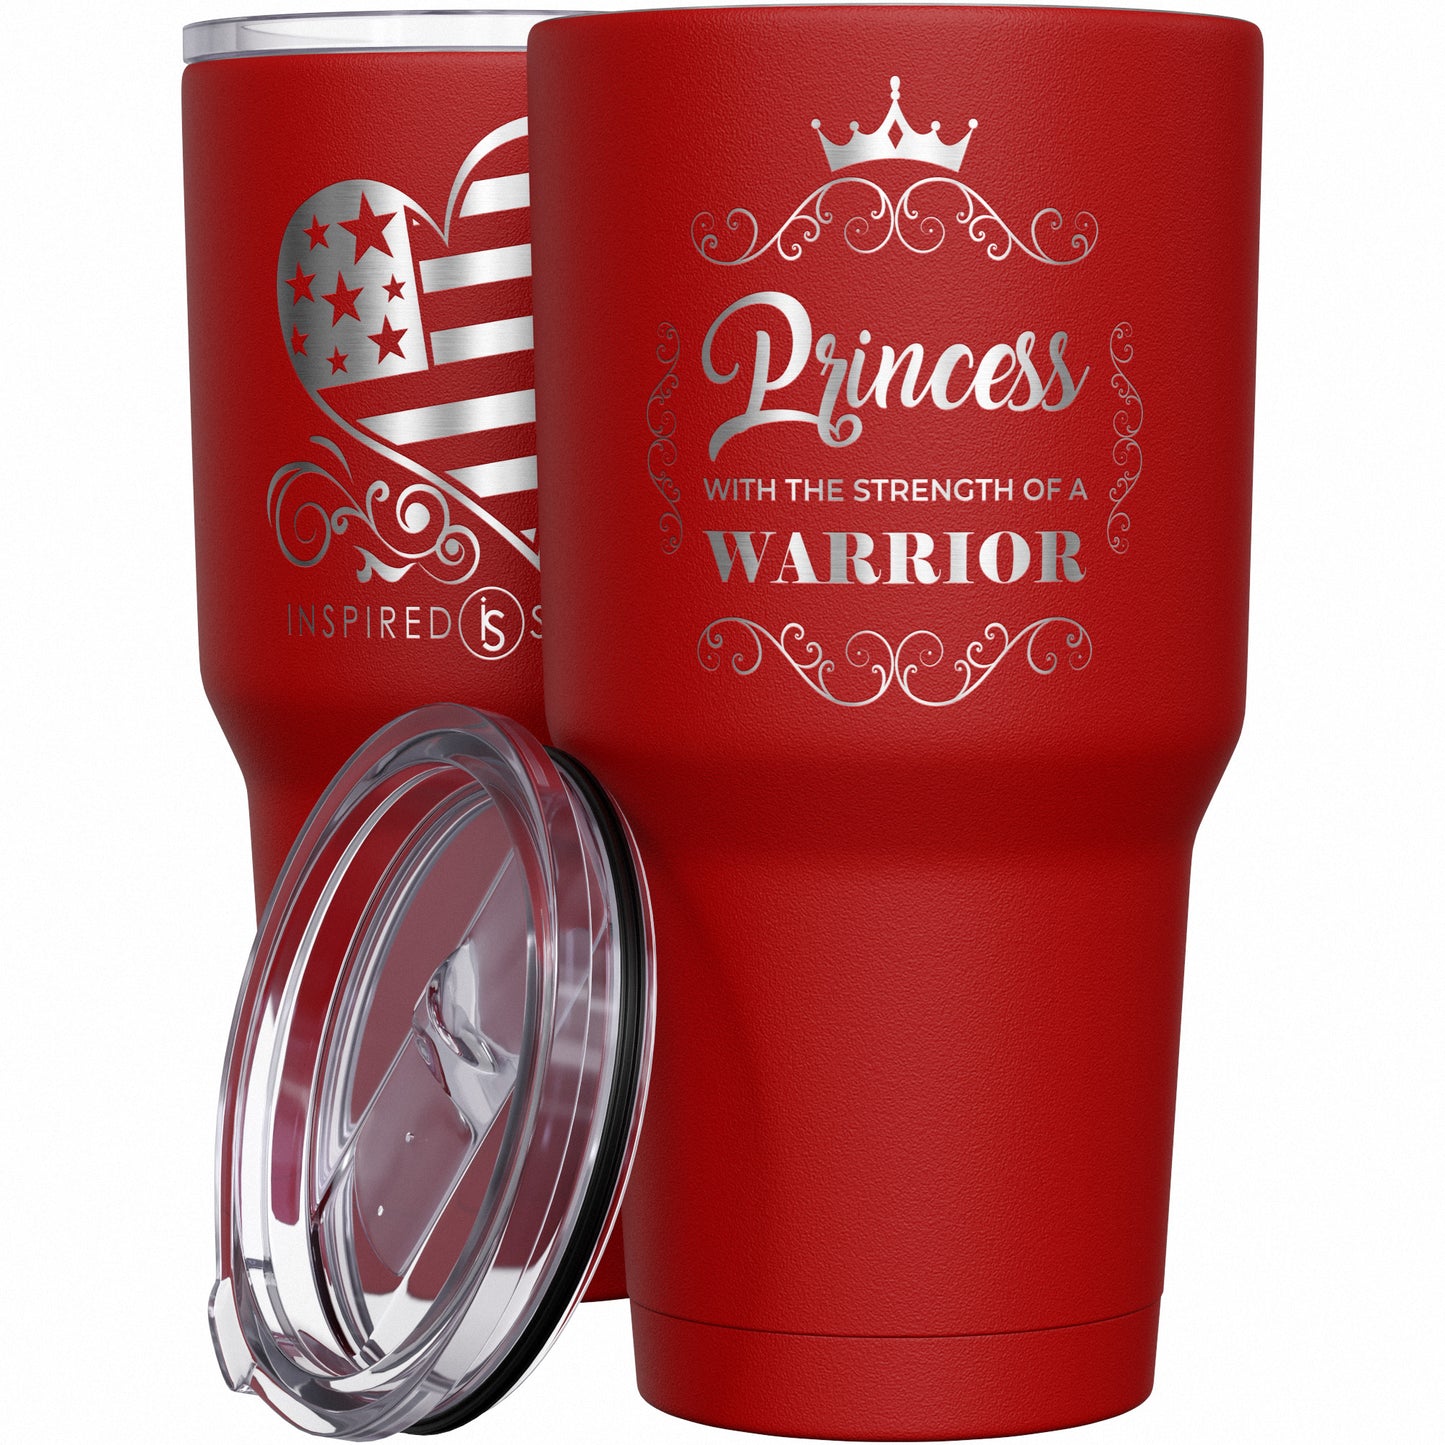 Princess with the Strength of a Warrior Tumbler